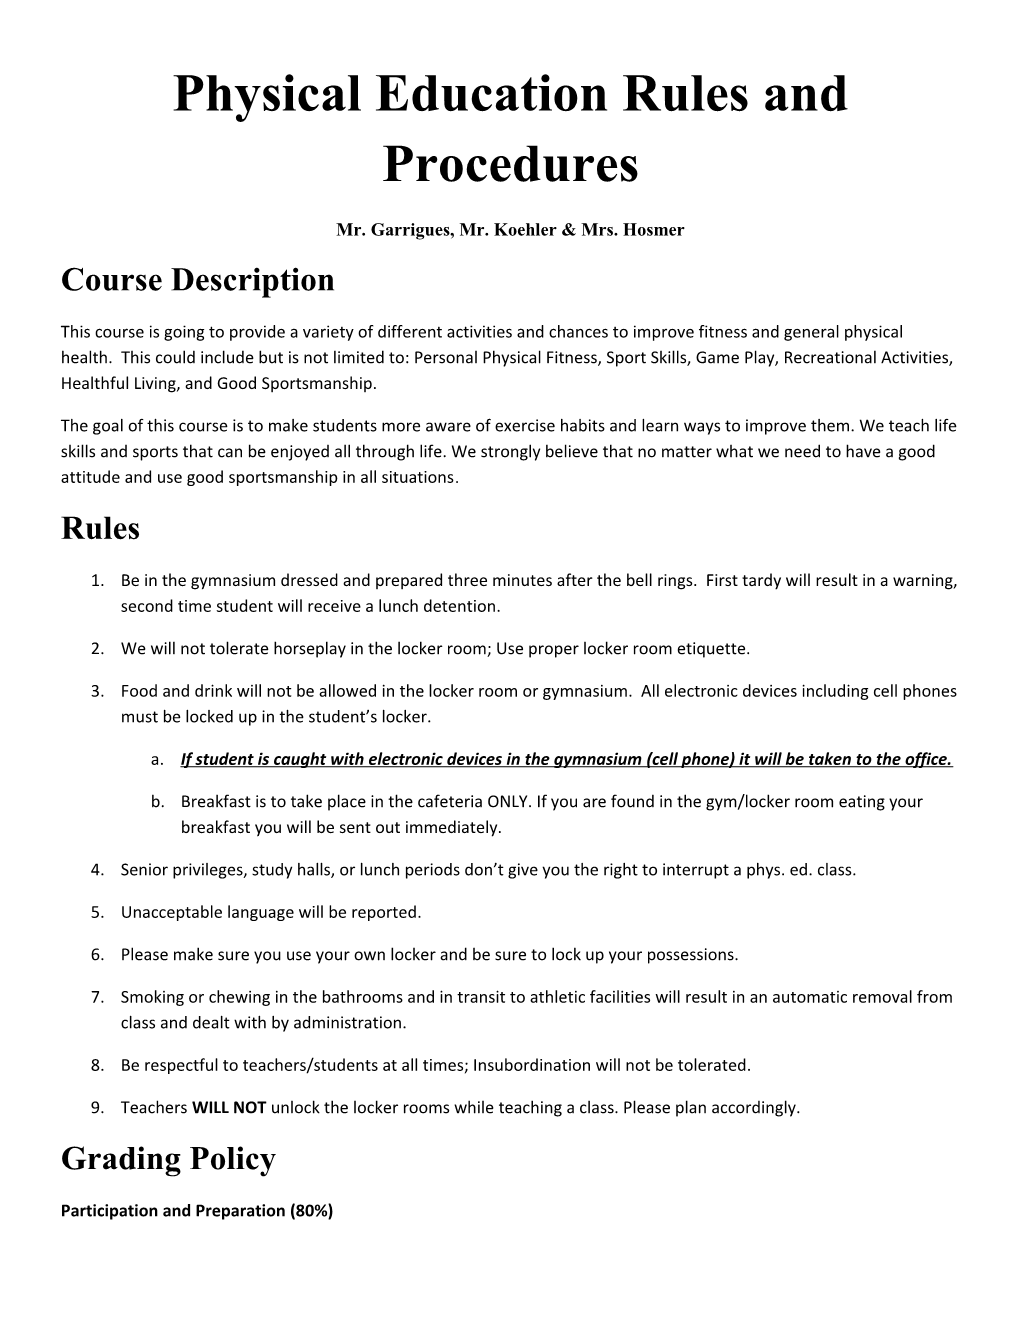 Physical Education Rules and Procedures